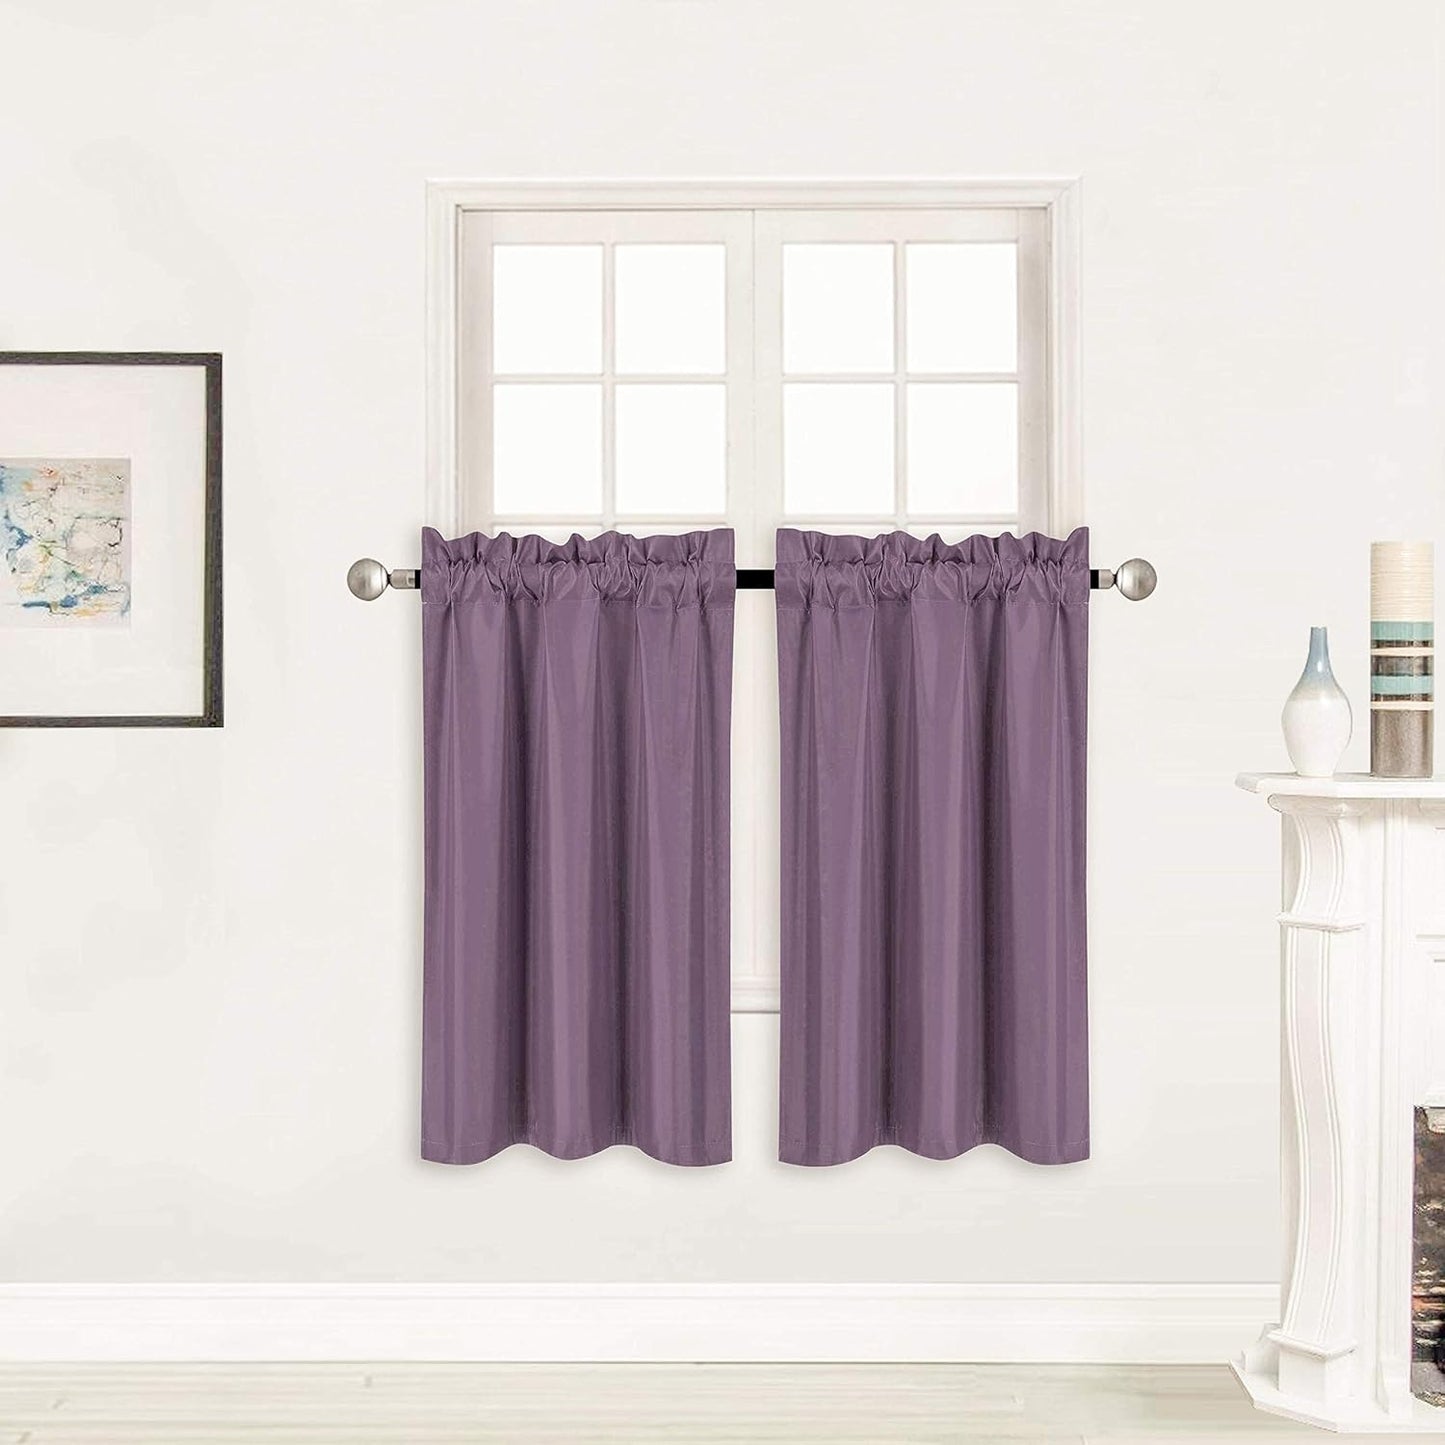 Home Collection 2 Panels 100% Blackout Curtain Set Solid Color with Rod Pocket Short Tier Drapes for Kitchen, Dinning Room, Bathroom, Bedroom,Living Room Window New (58” Wide X 23” Long, Black)  Kids Zone home Linen Purple 58” Wide X 34” Long 